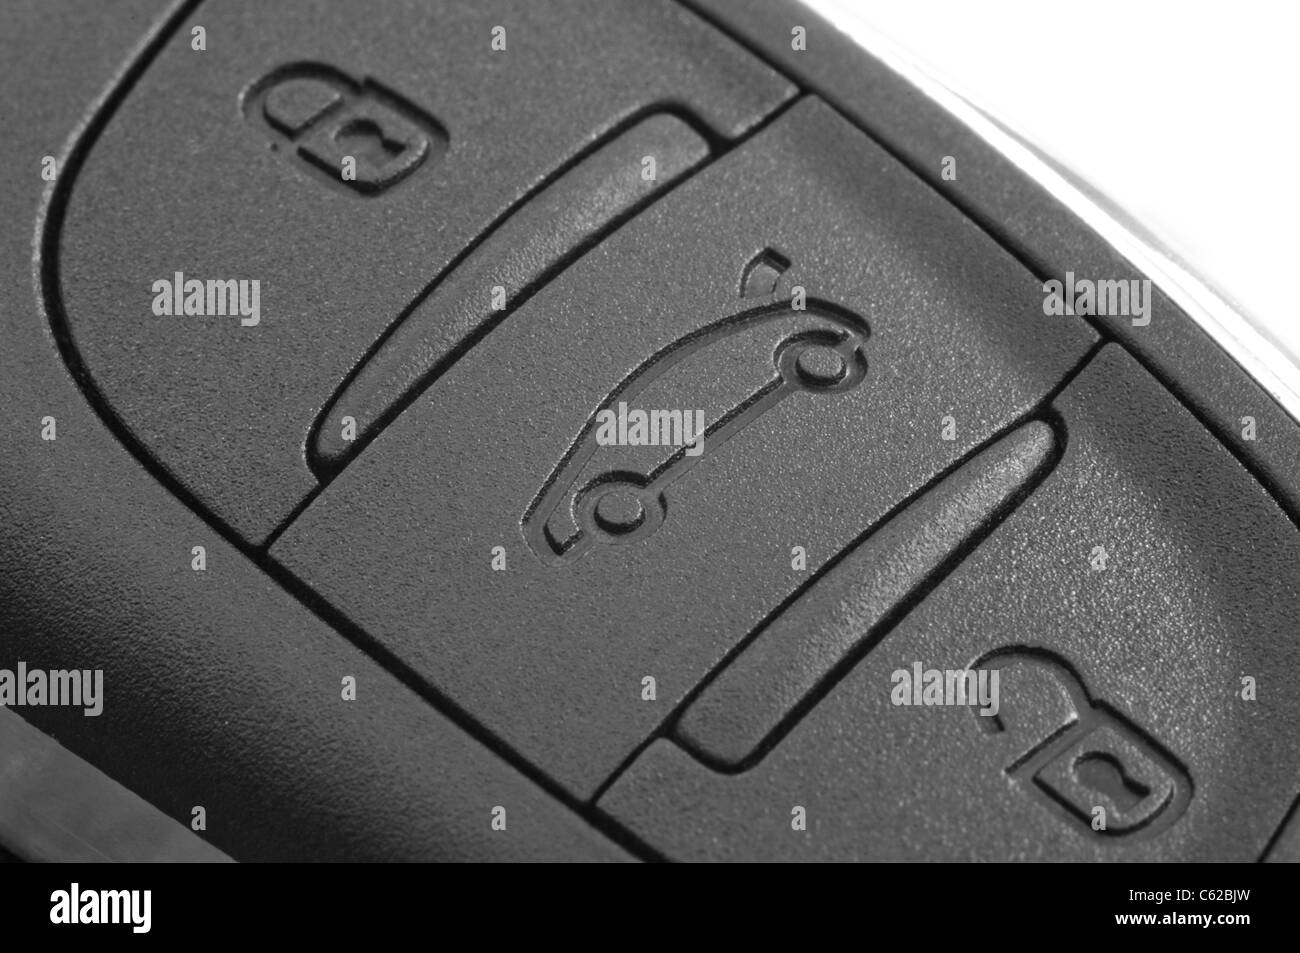 macro photograph of a remote control buttons on a car key Stock Photo